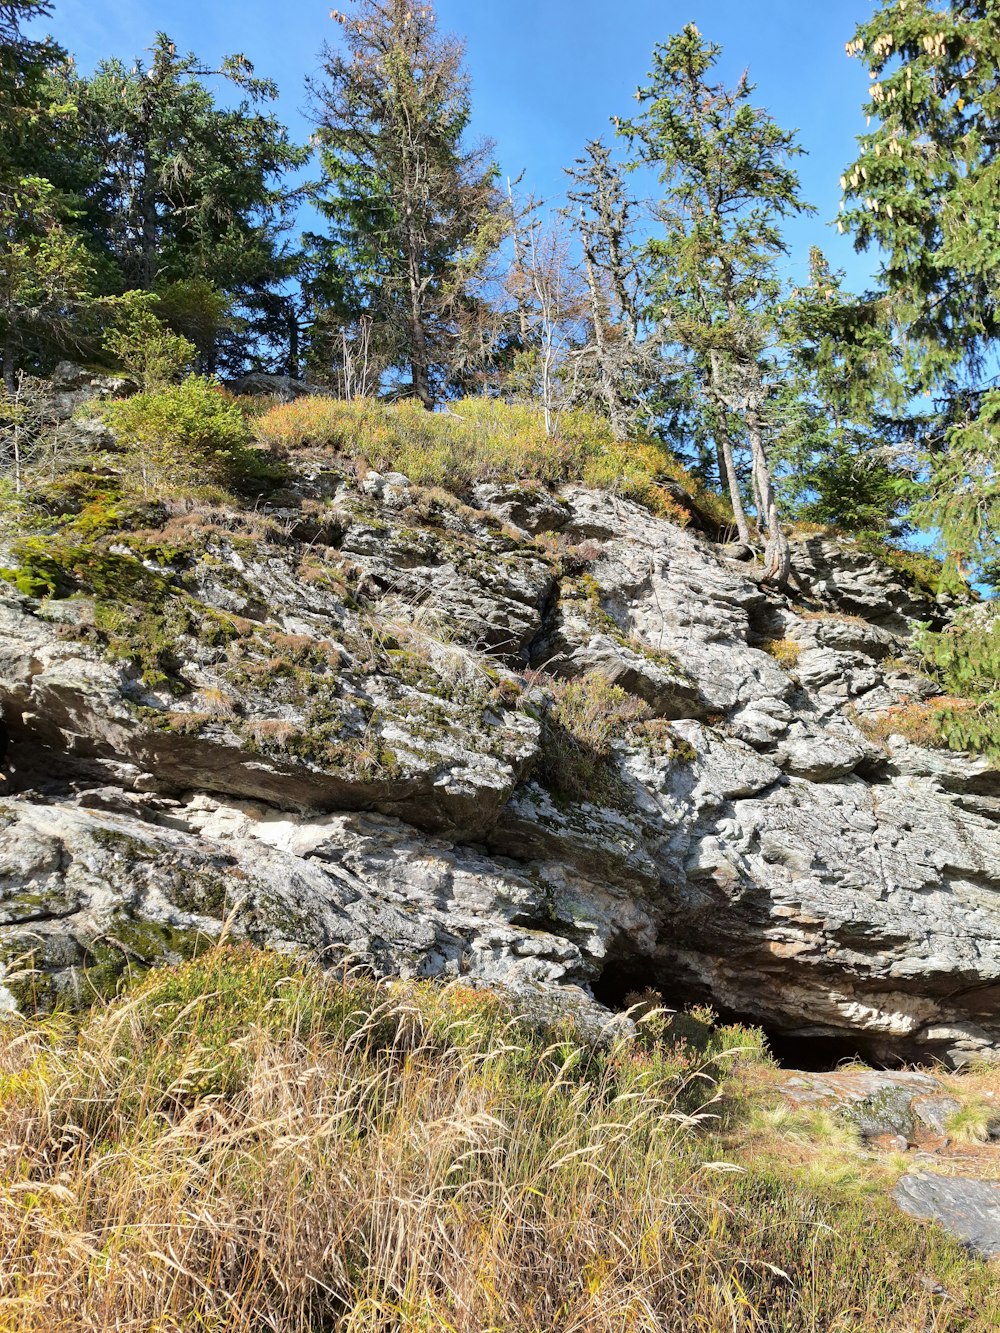 a rocky hillside with trees and grass on it